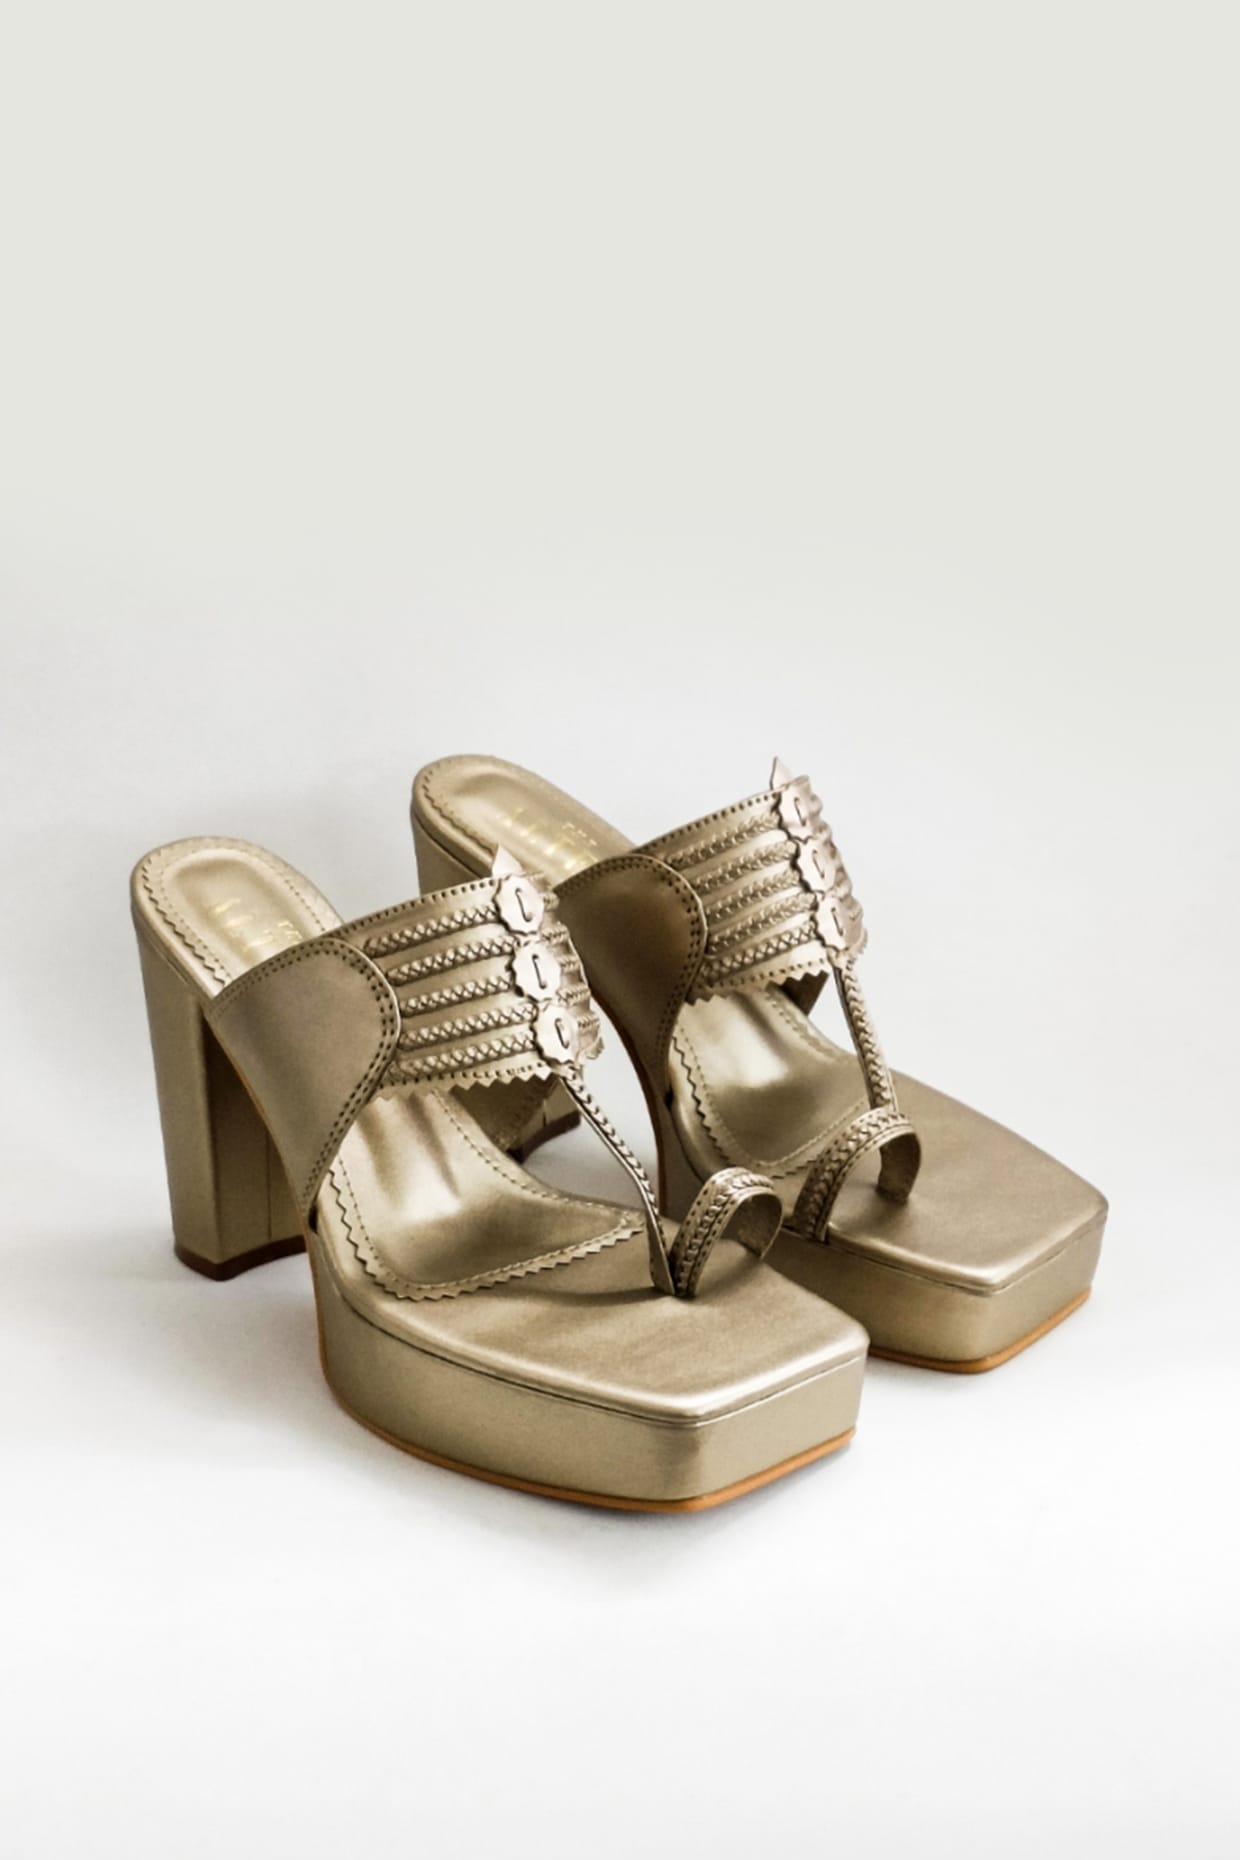 STELLA MCCARTNEY Faux leather slingback sandals | THE OUTNET